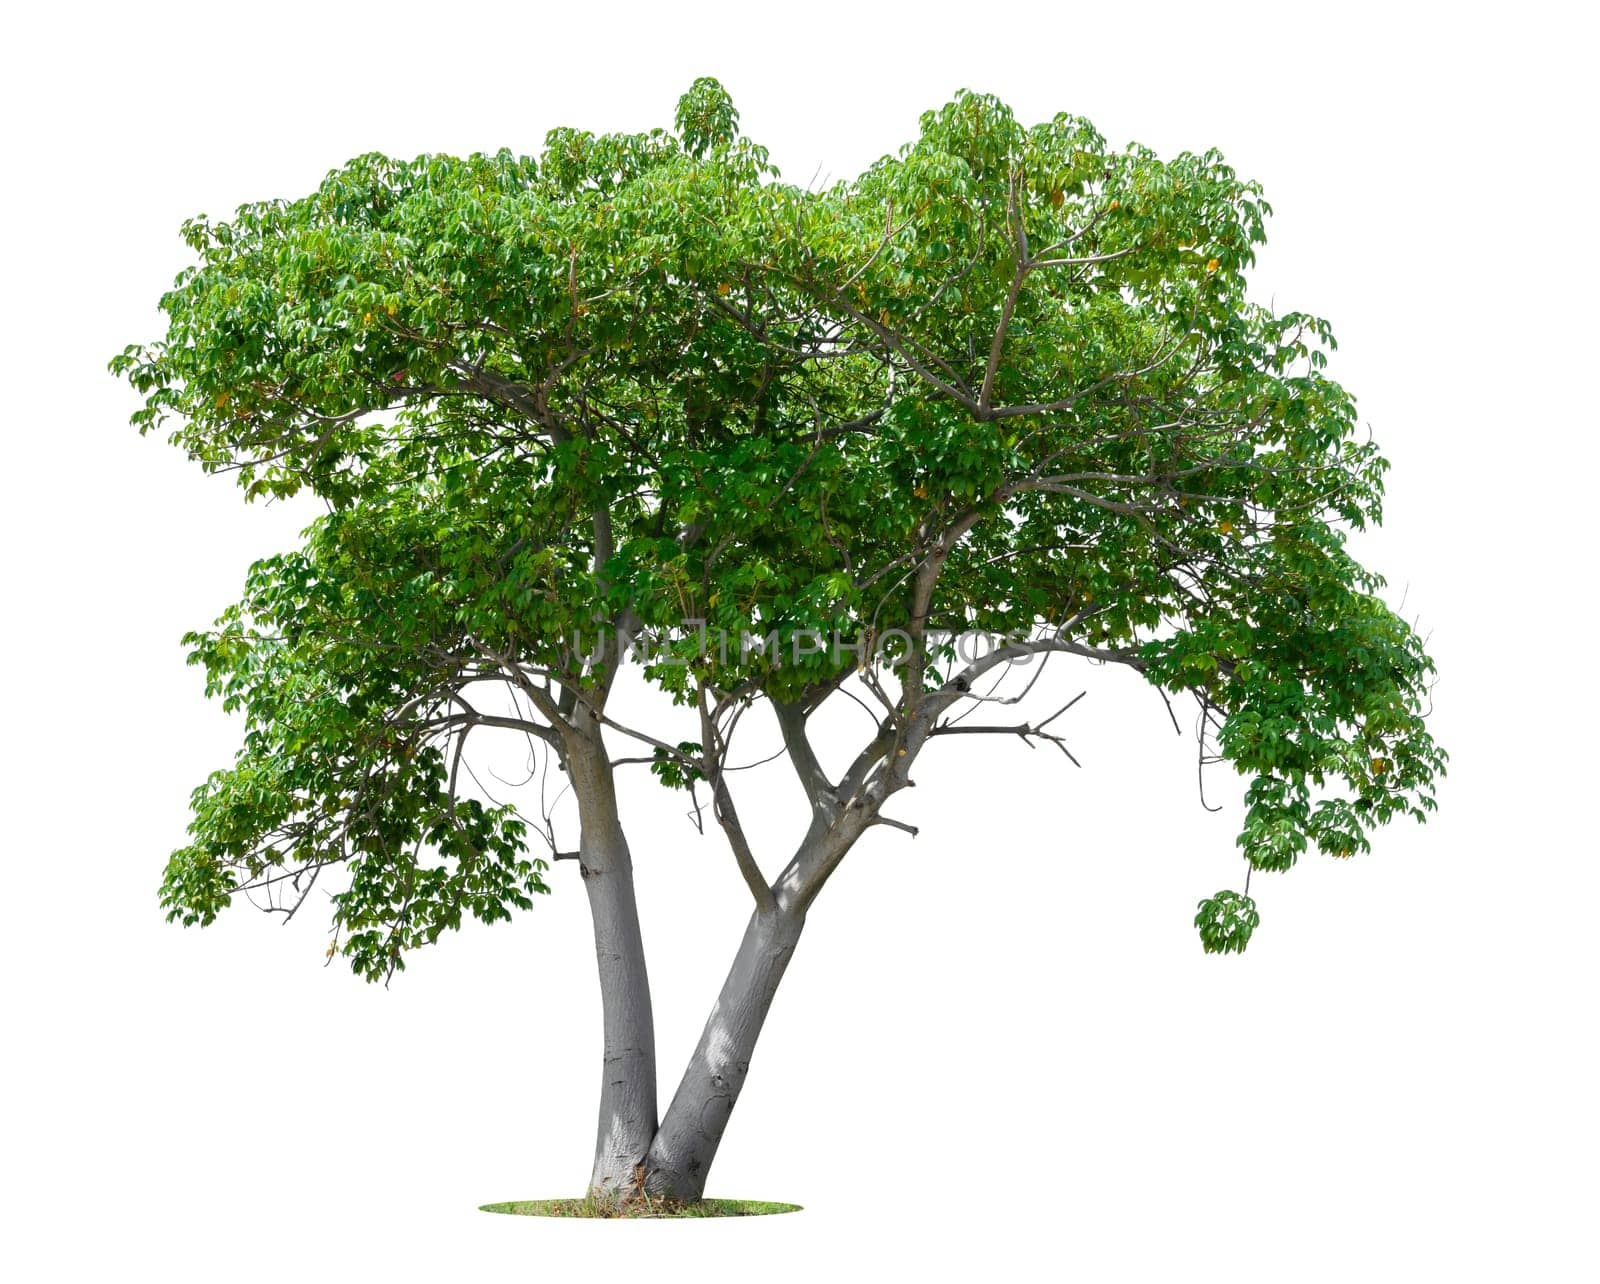 Beautiful green tree isolated on white background.